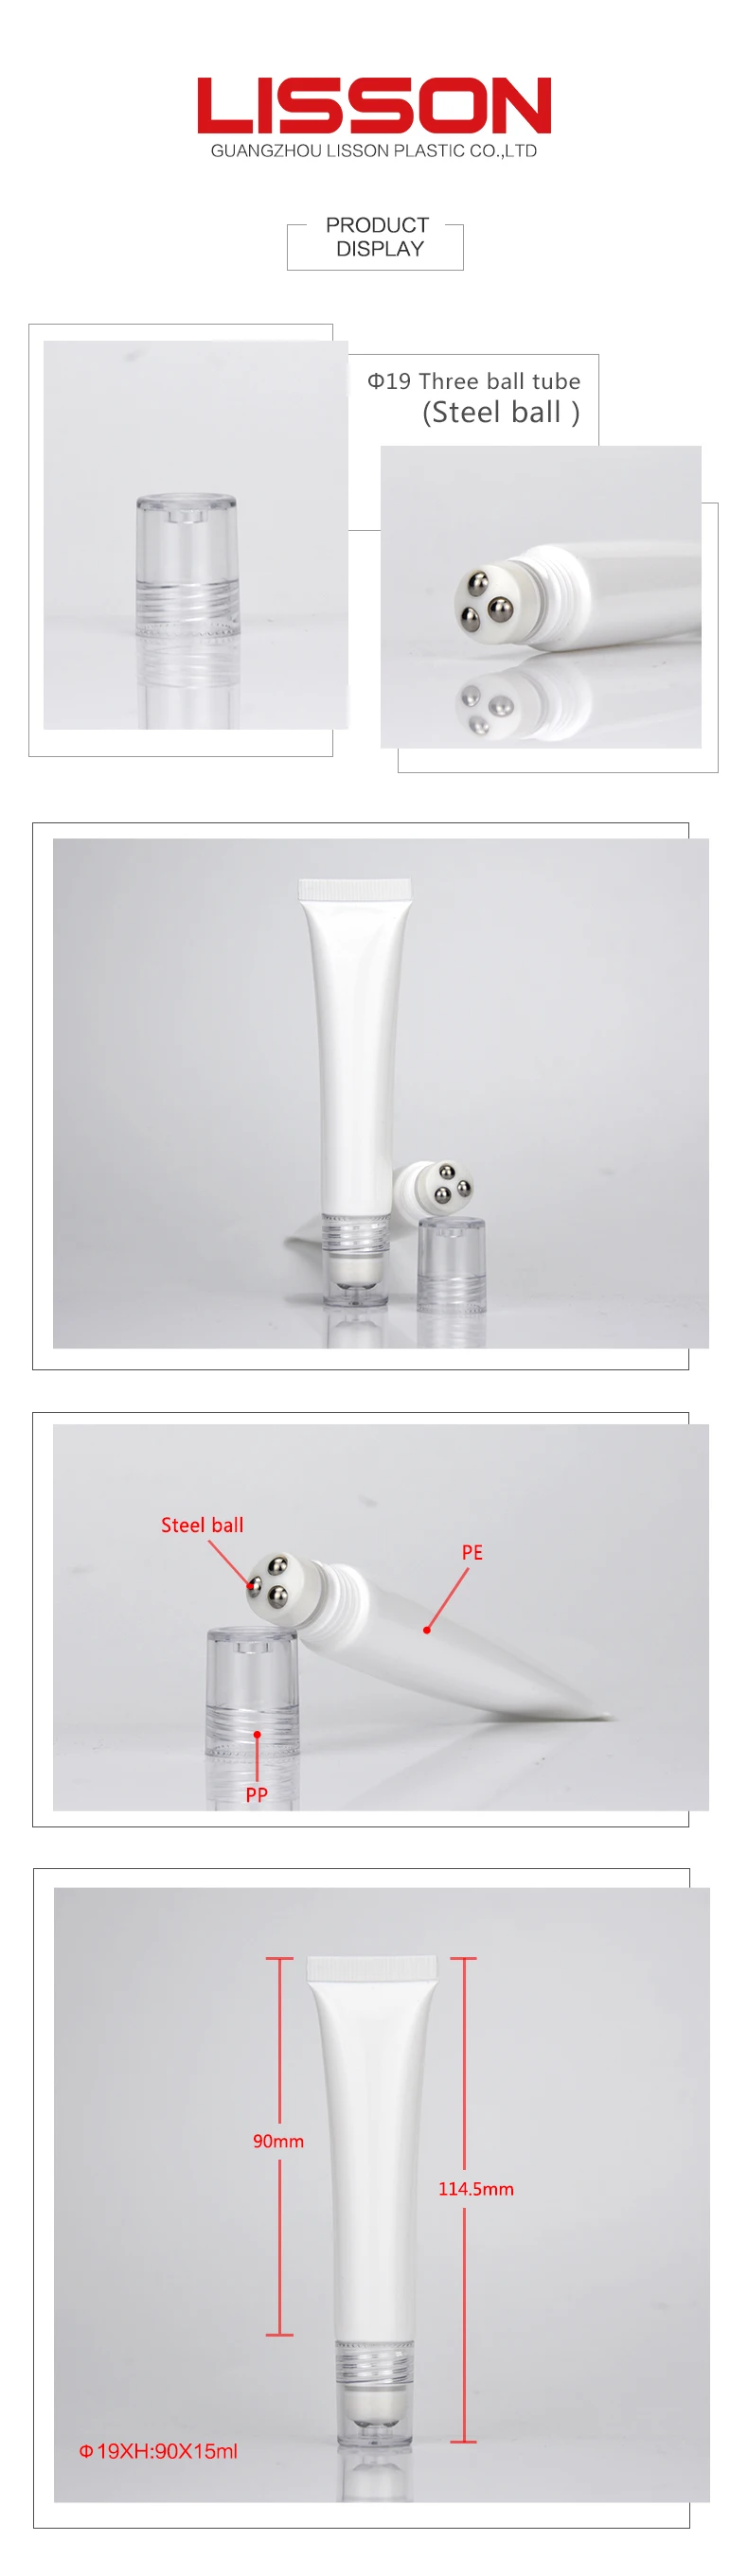 Factory price 15ml plastic cosmetic massage tube for eye cream essence with 3 triple roller ball applicator